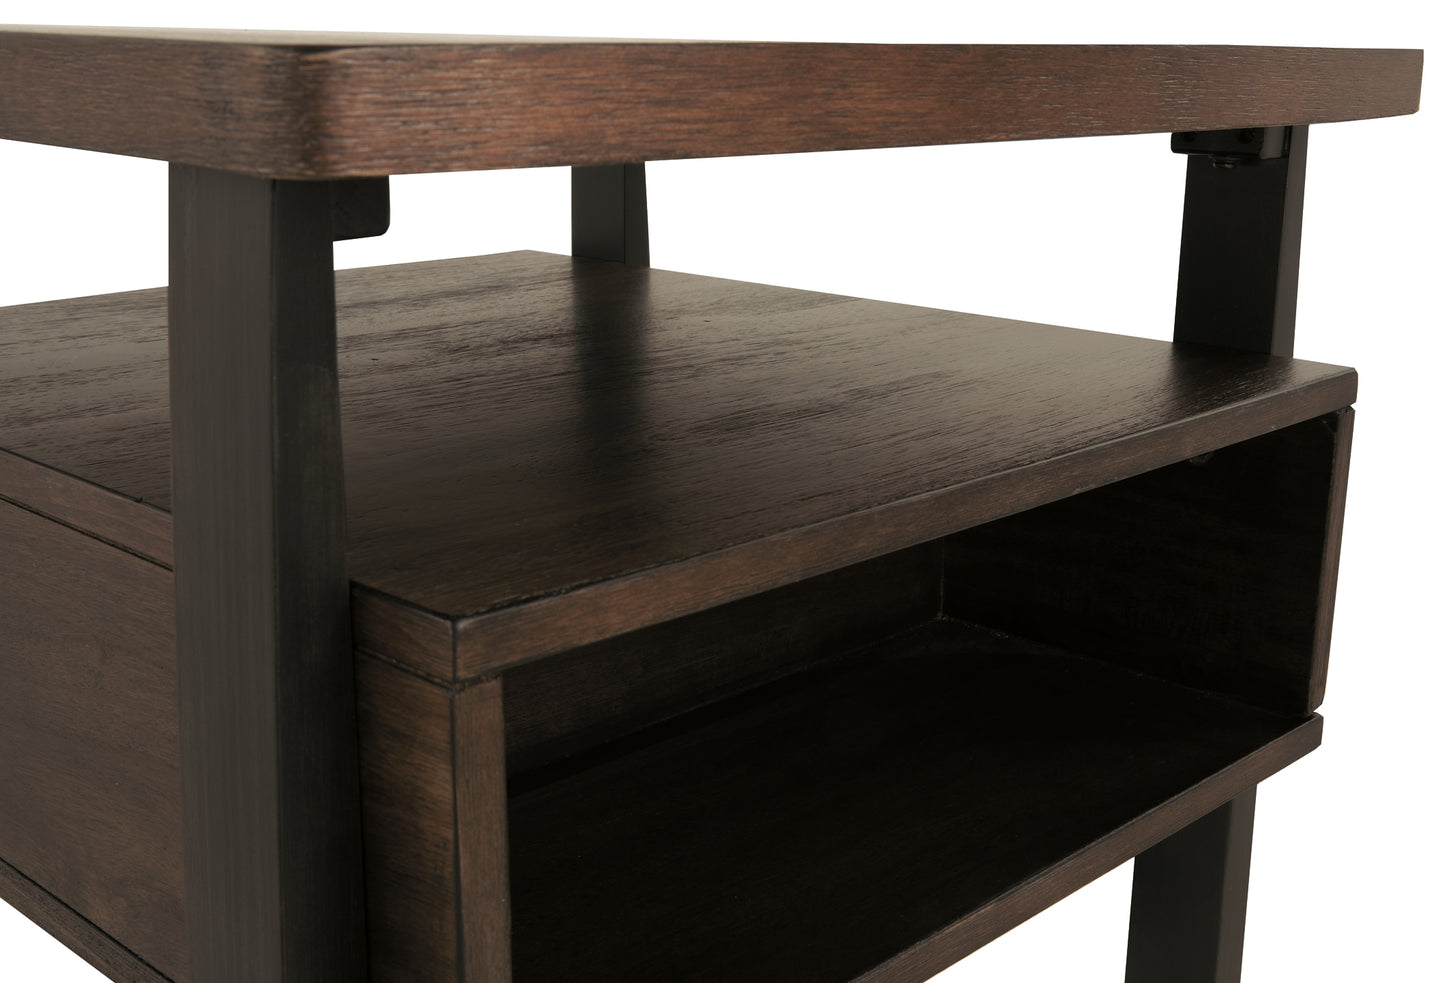 Vailbry Rectangular End Table Signature Design by Ashley®